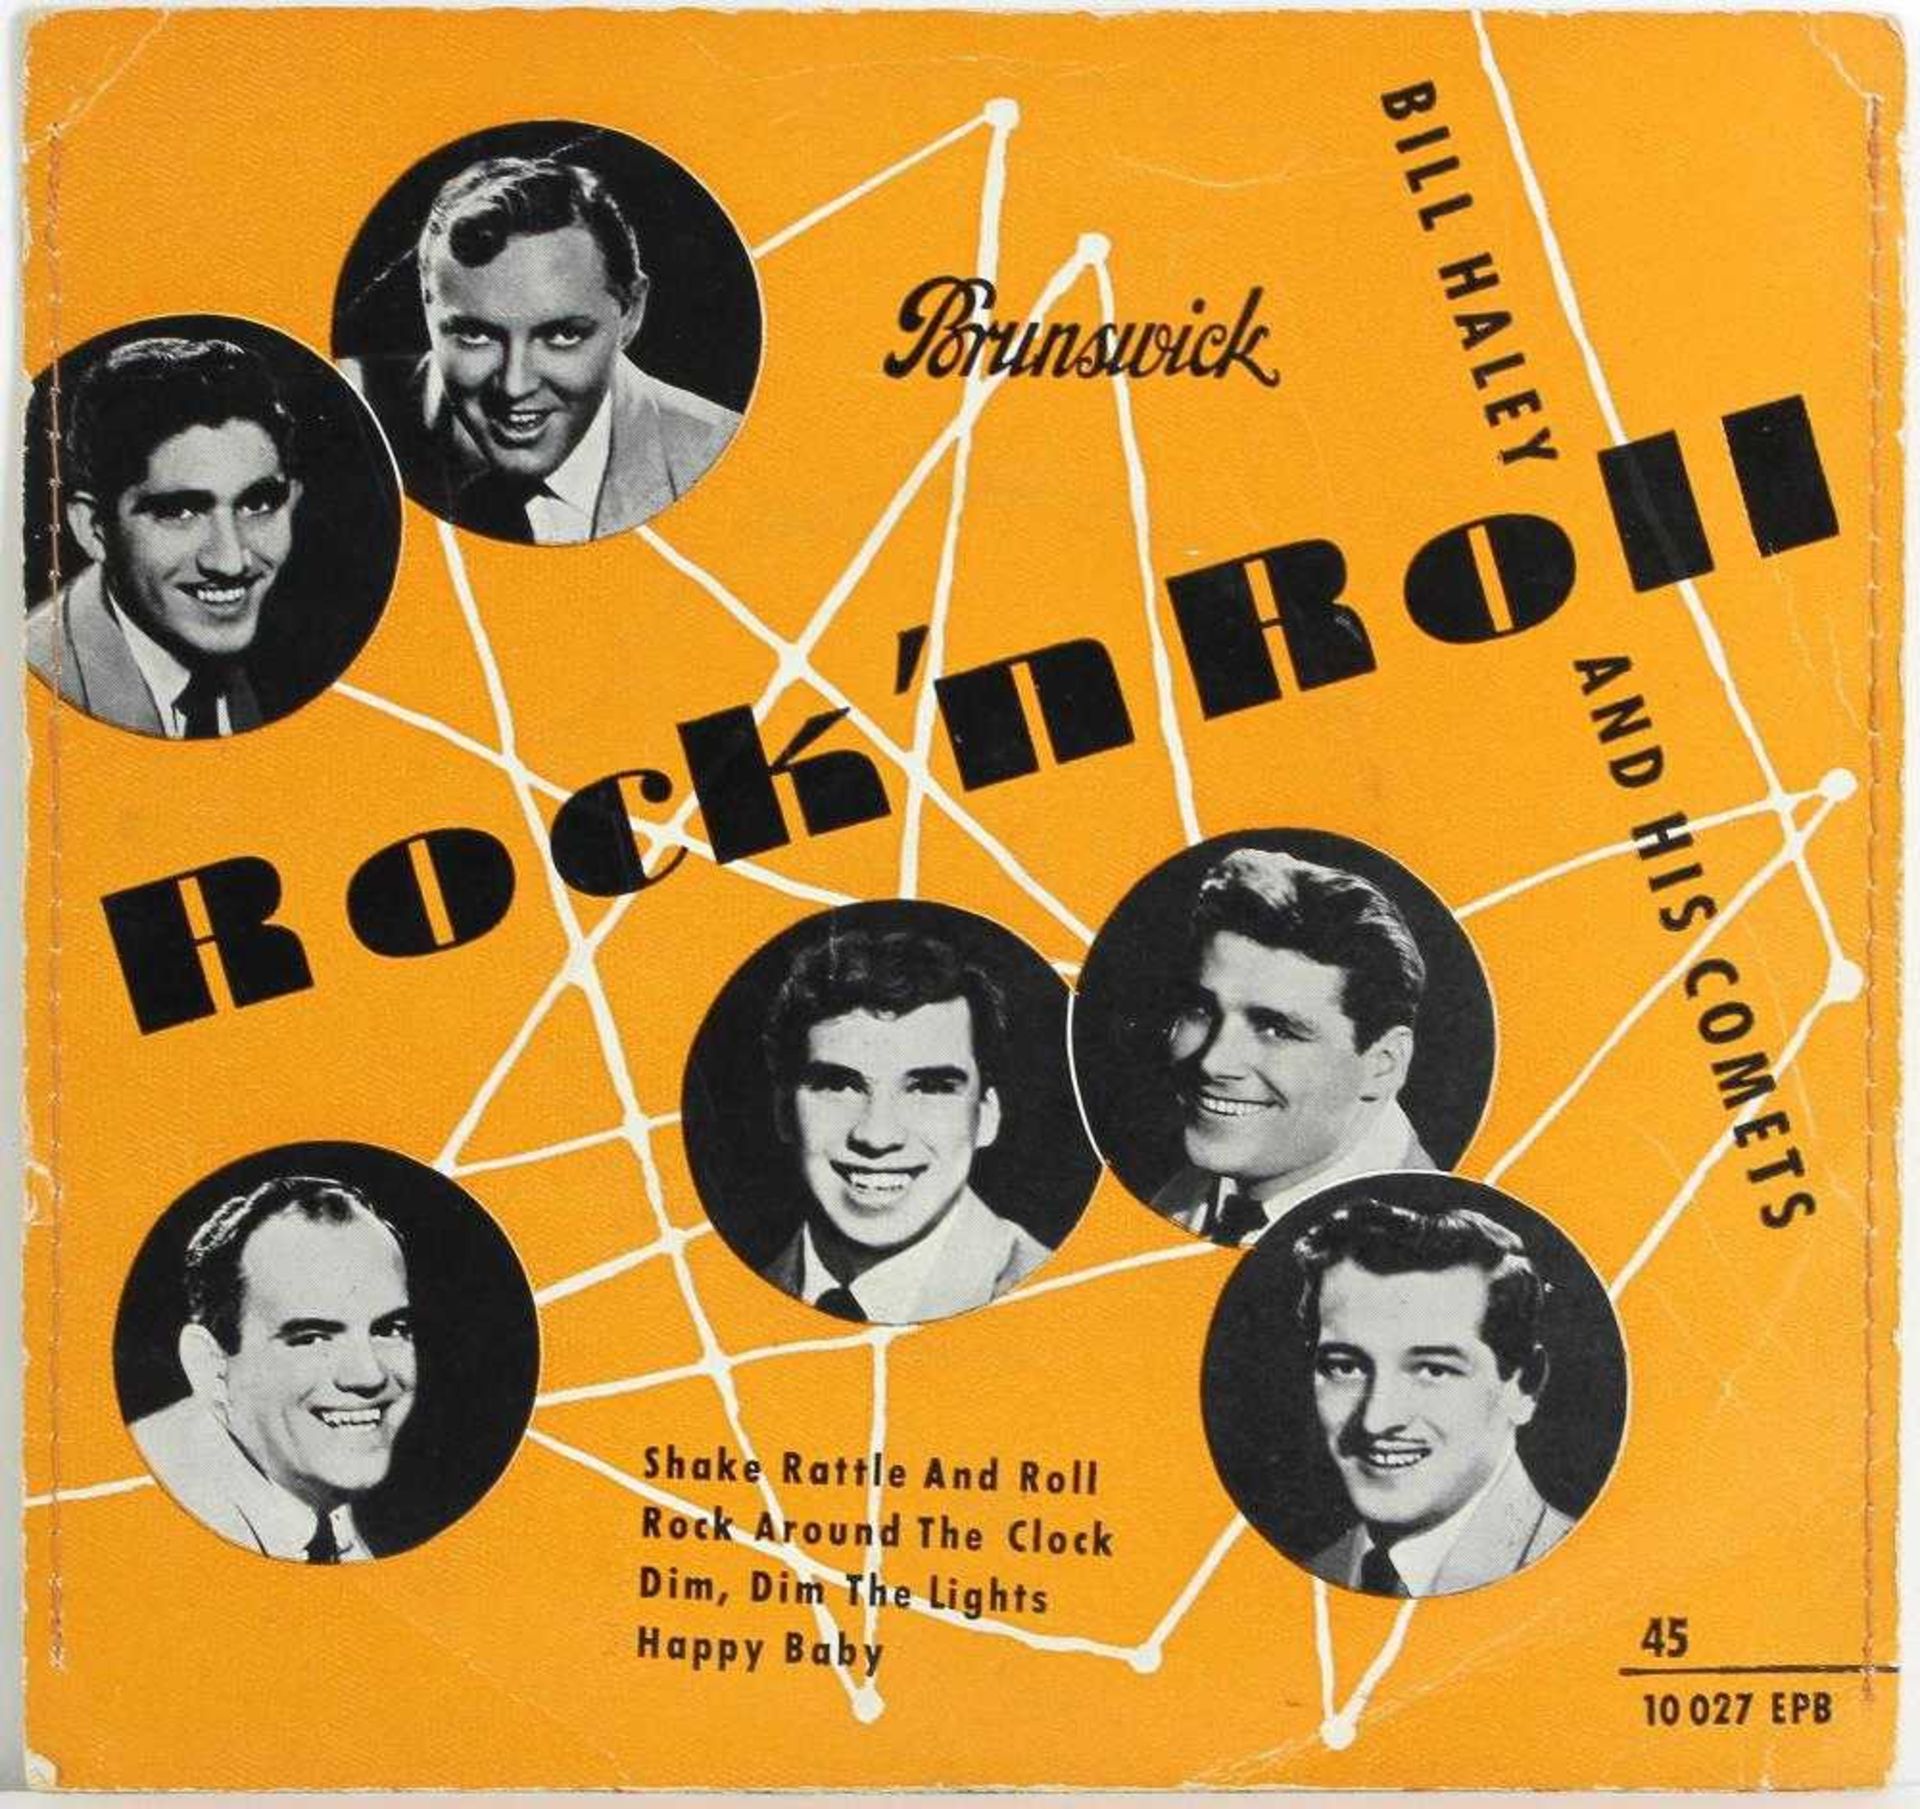 Bill Haley and his Comets Rock´n Roll. Shake Rattle And Roll, Rock Around The Clock, Dim, Dim The